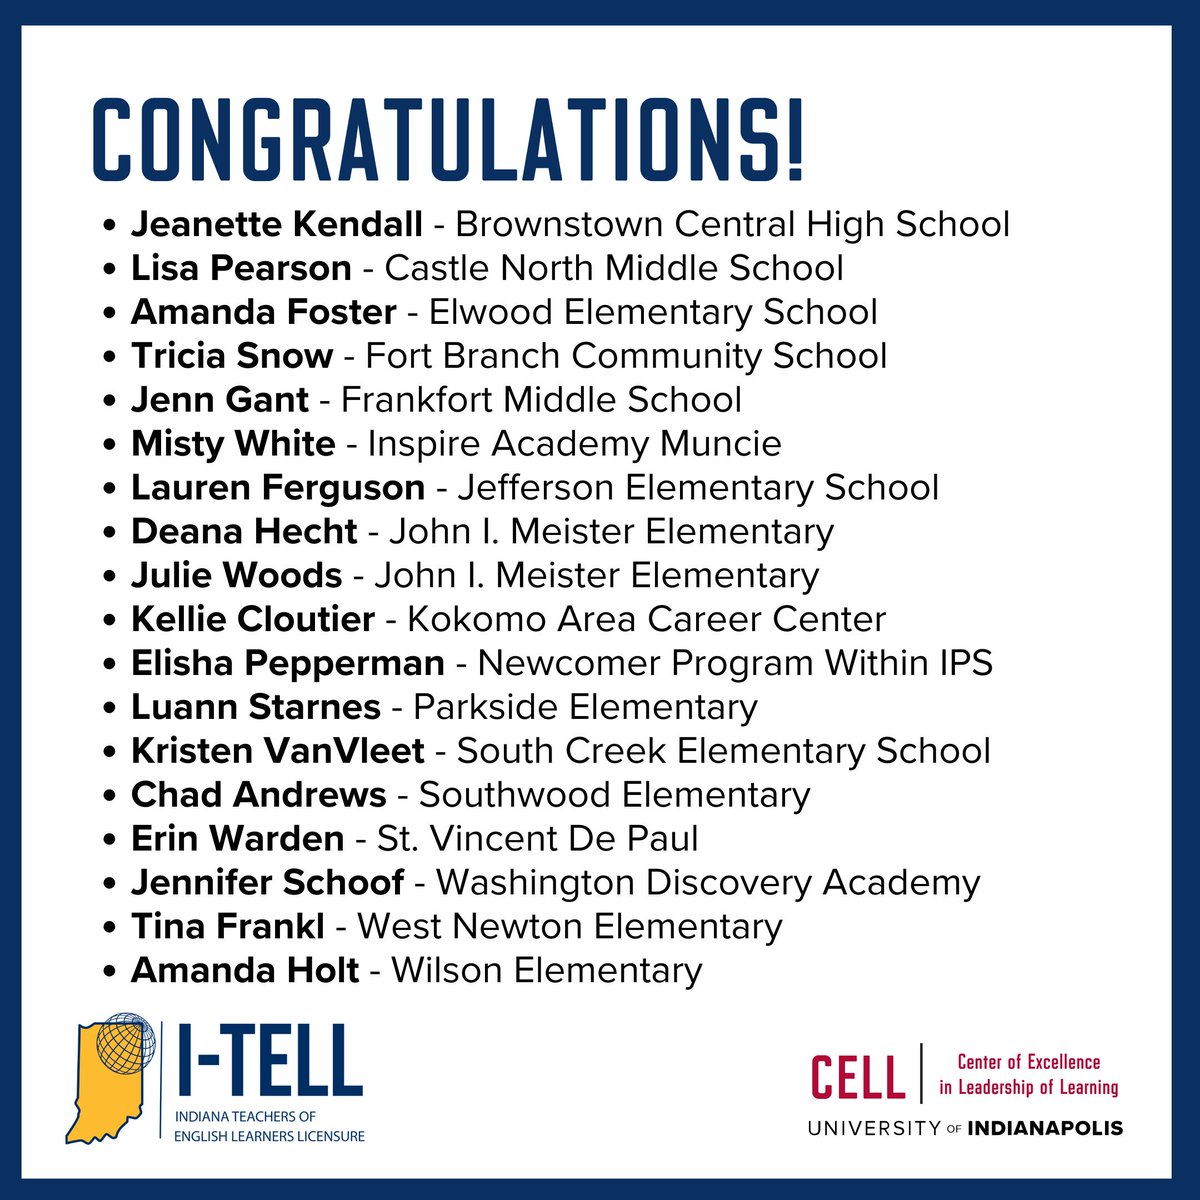 Congratulations to these teachers who completed coursework through CELL’s #ITELL initiative to earn ENL licensure and become teachers of record for English learners! Learn more at IndianaTELL.org.